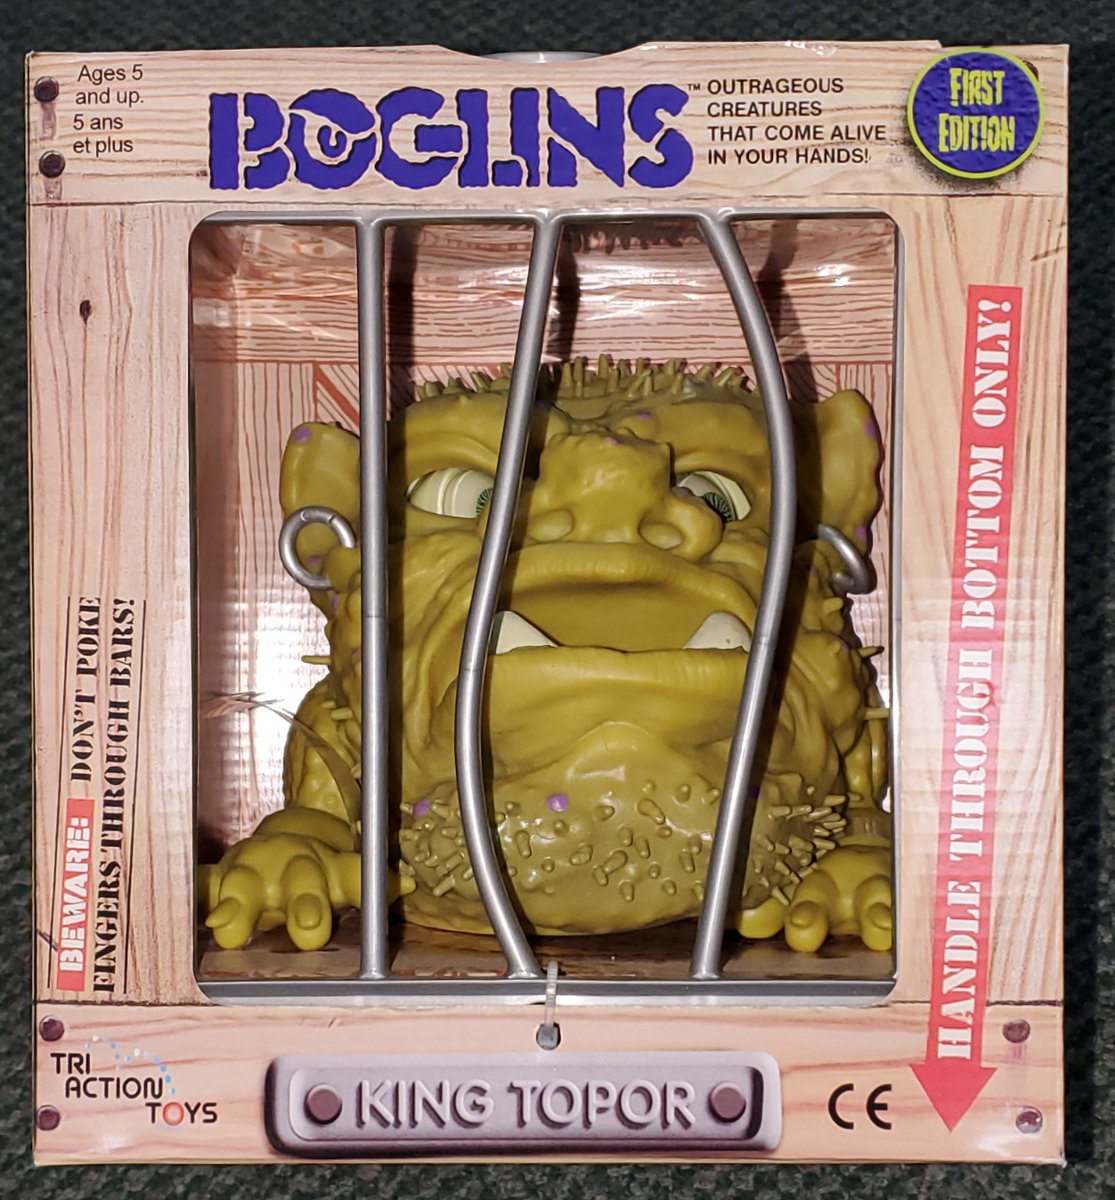 MIB Tri Action Toys First Edition King Topor Boglins Puppet: Mint in Box 1